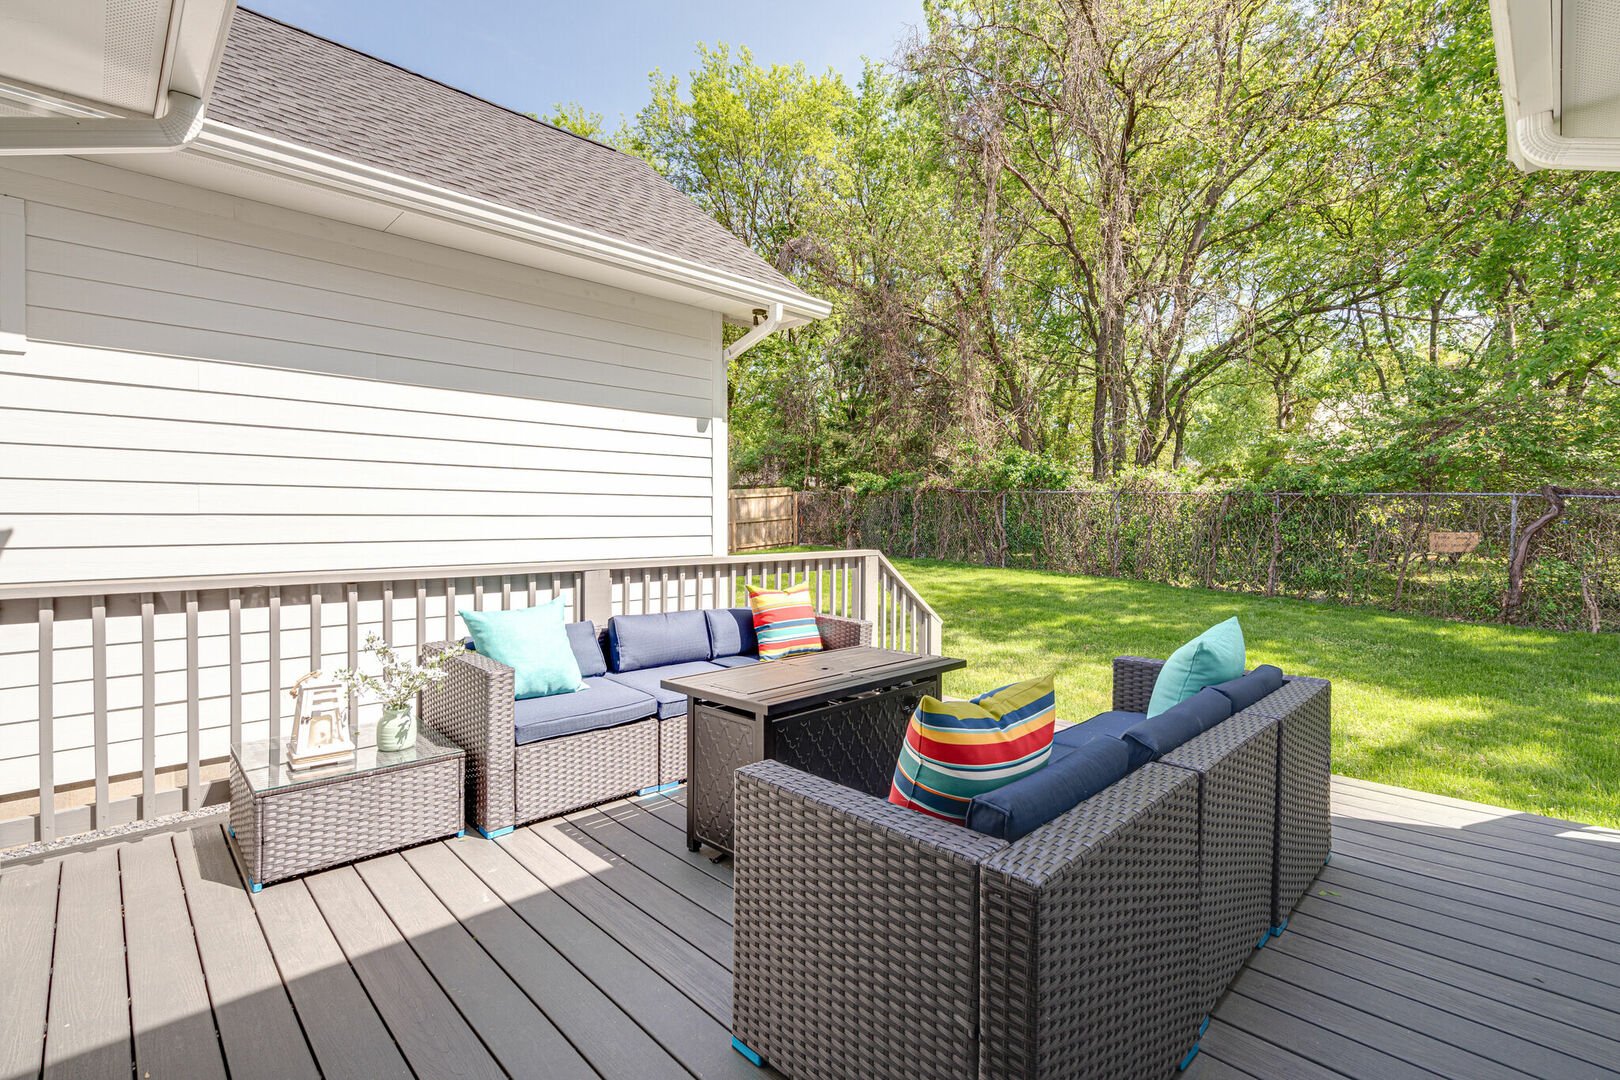 Private yard with patio. The patio includes a fire pit and a surrounding lounge area.